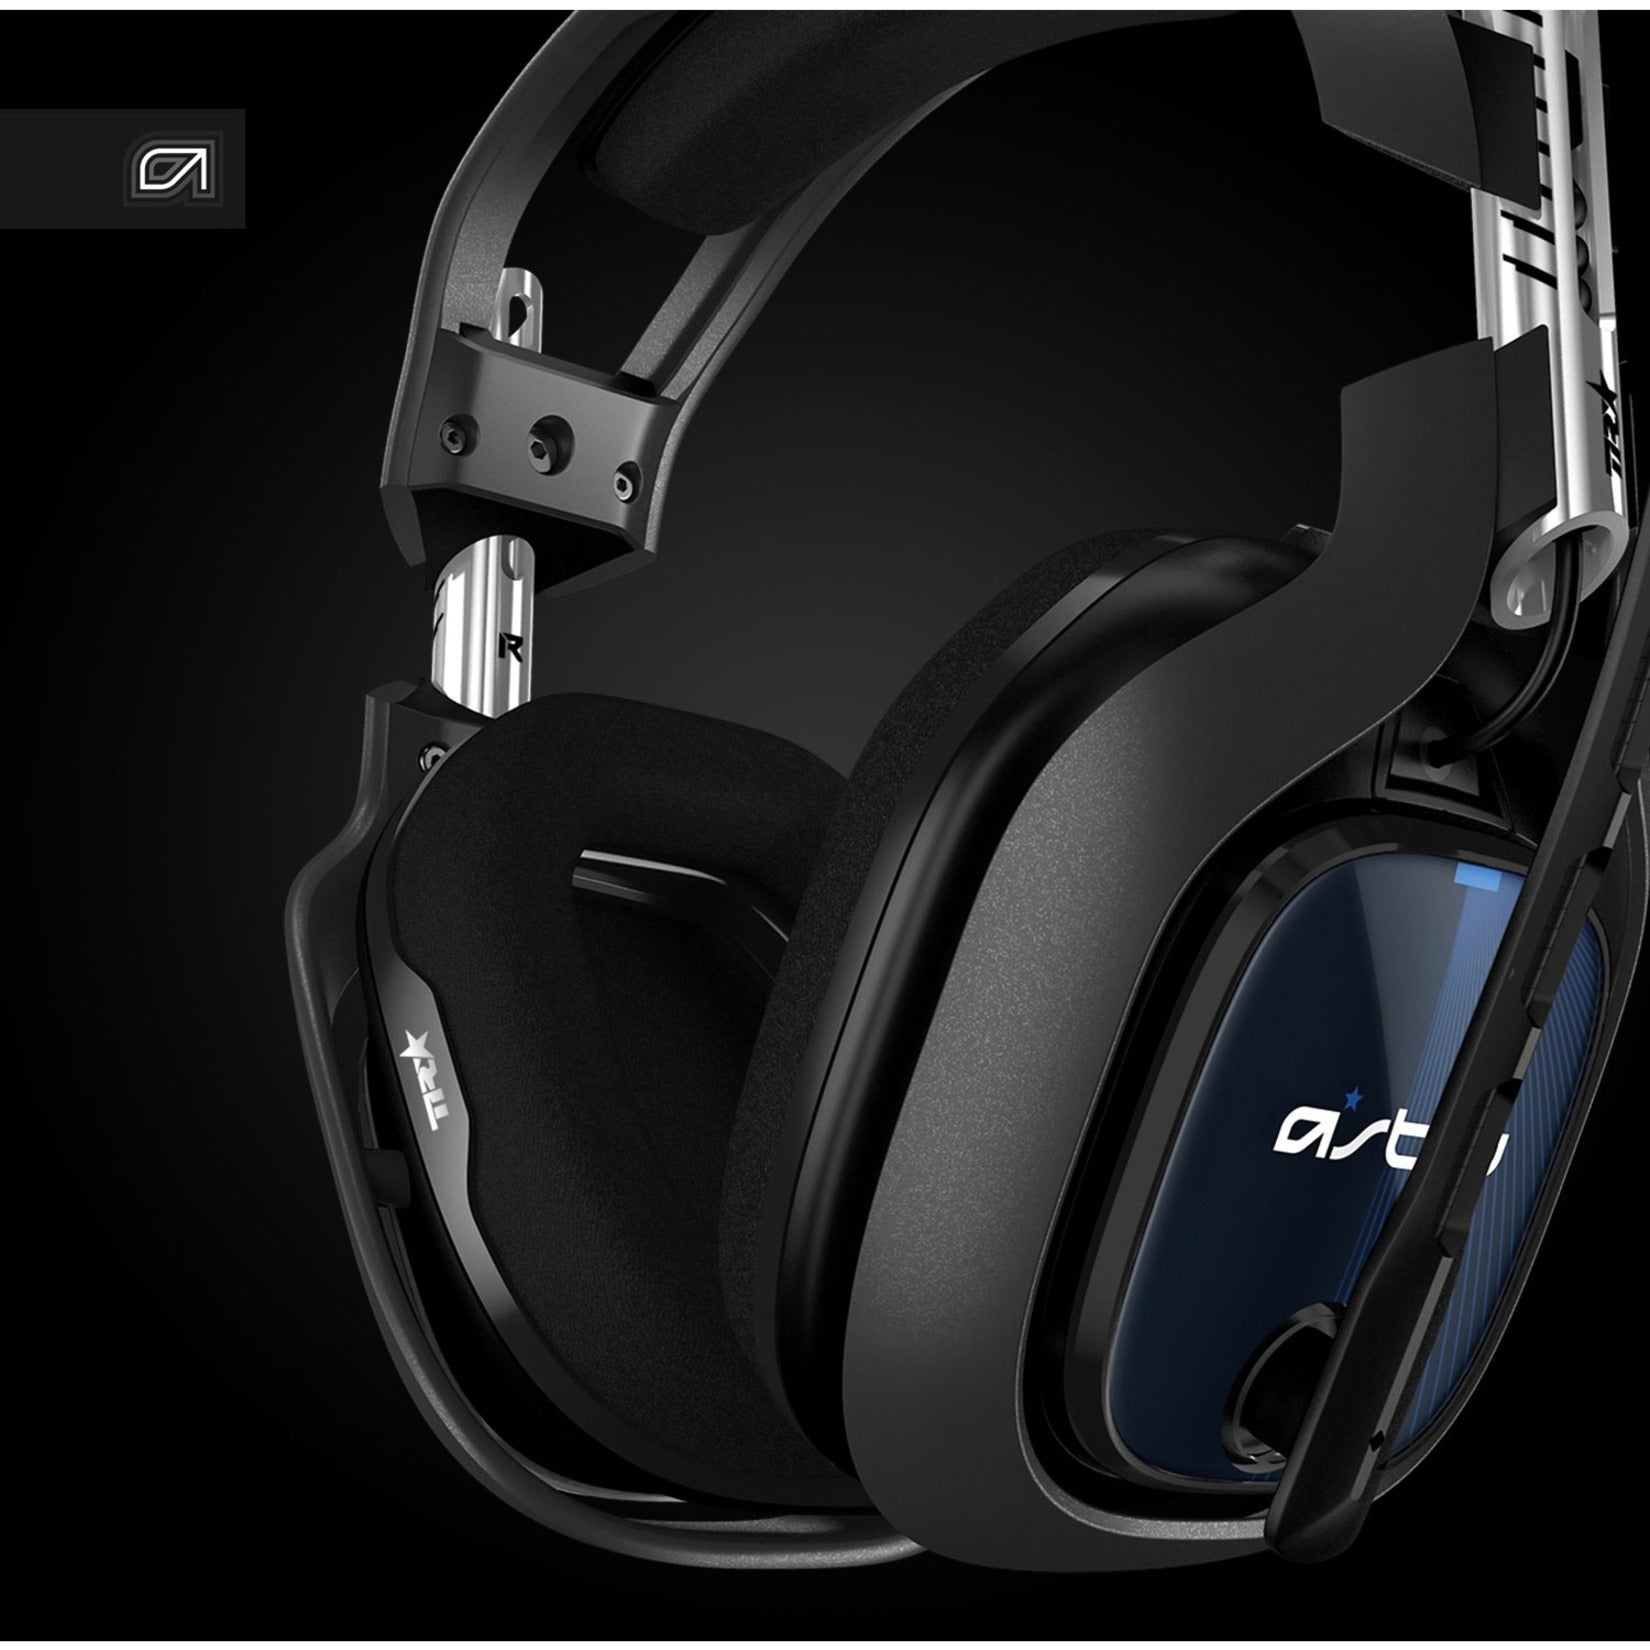 Astro 939-001663 A40 TR Headset for PS4 & PC, Lightweight Gaming Headset with Noise Isolation